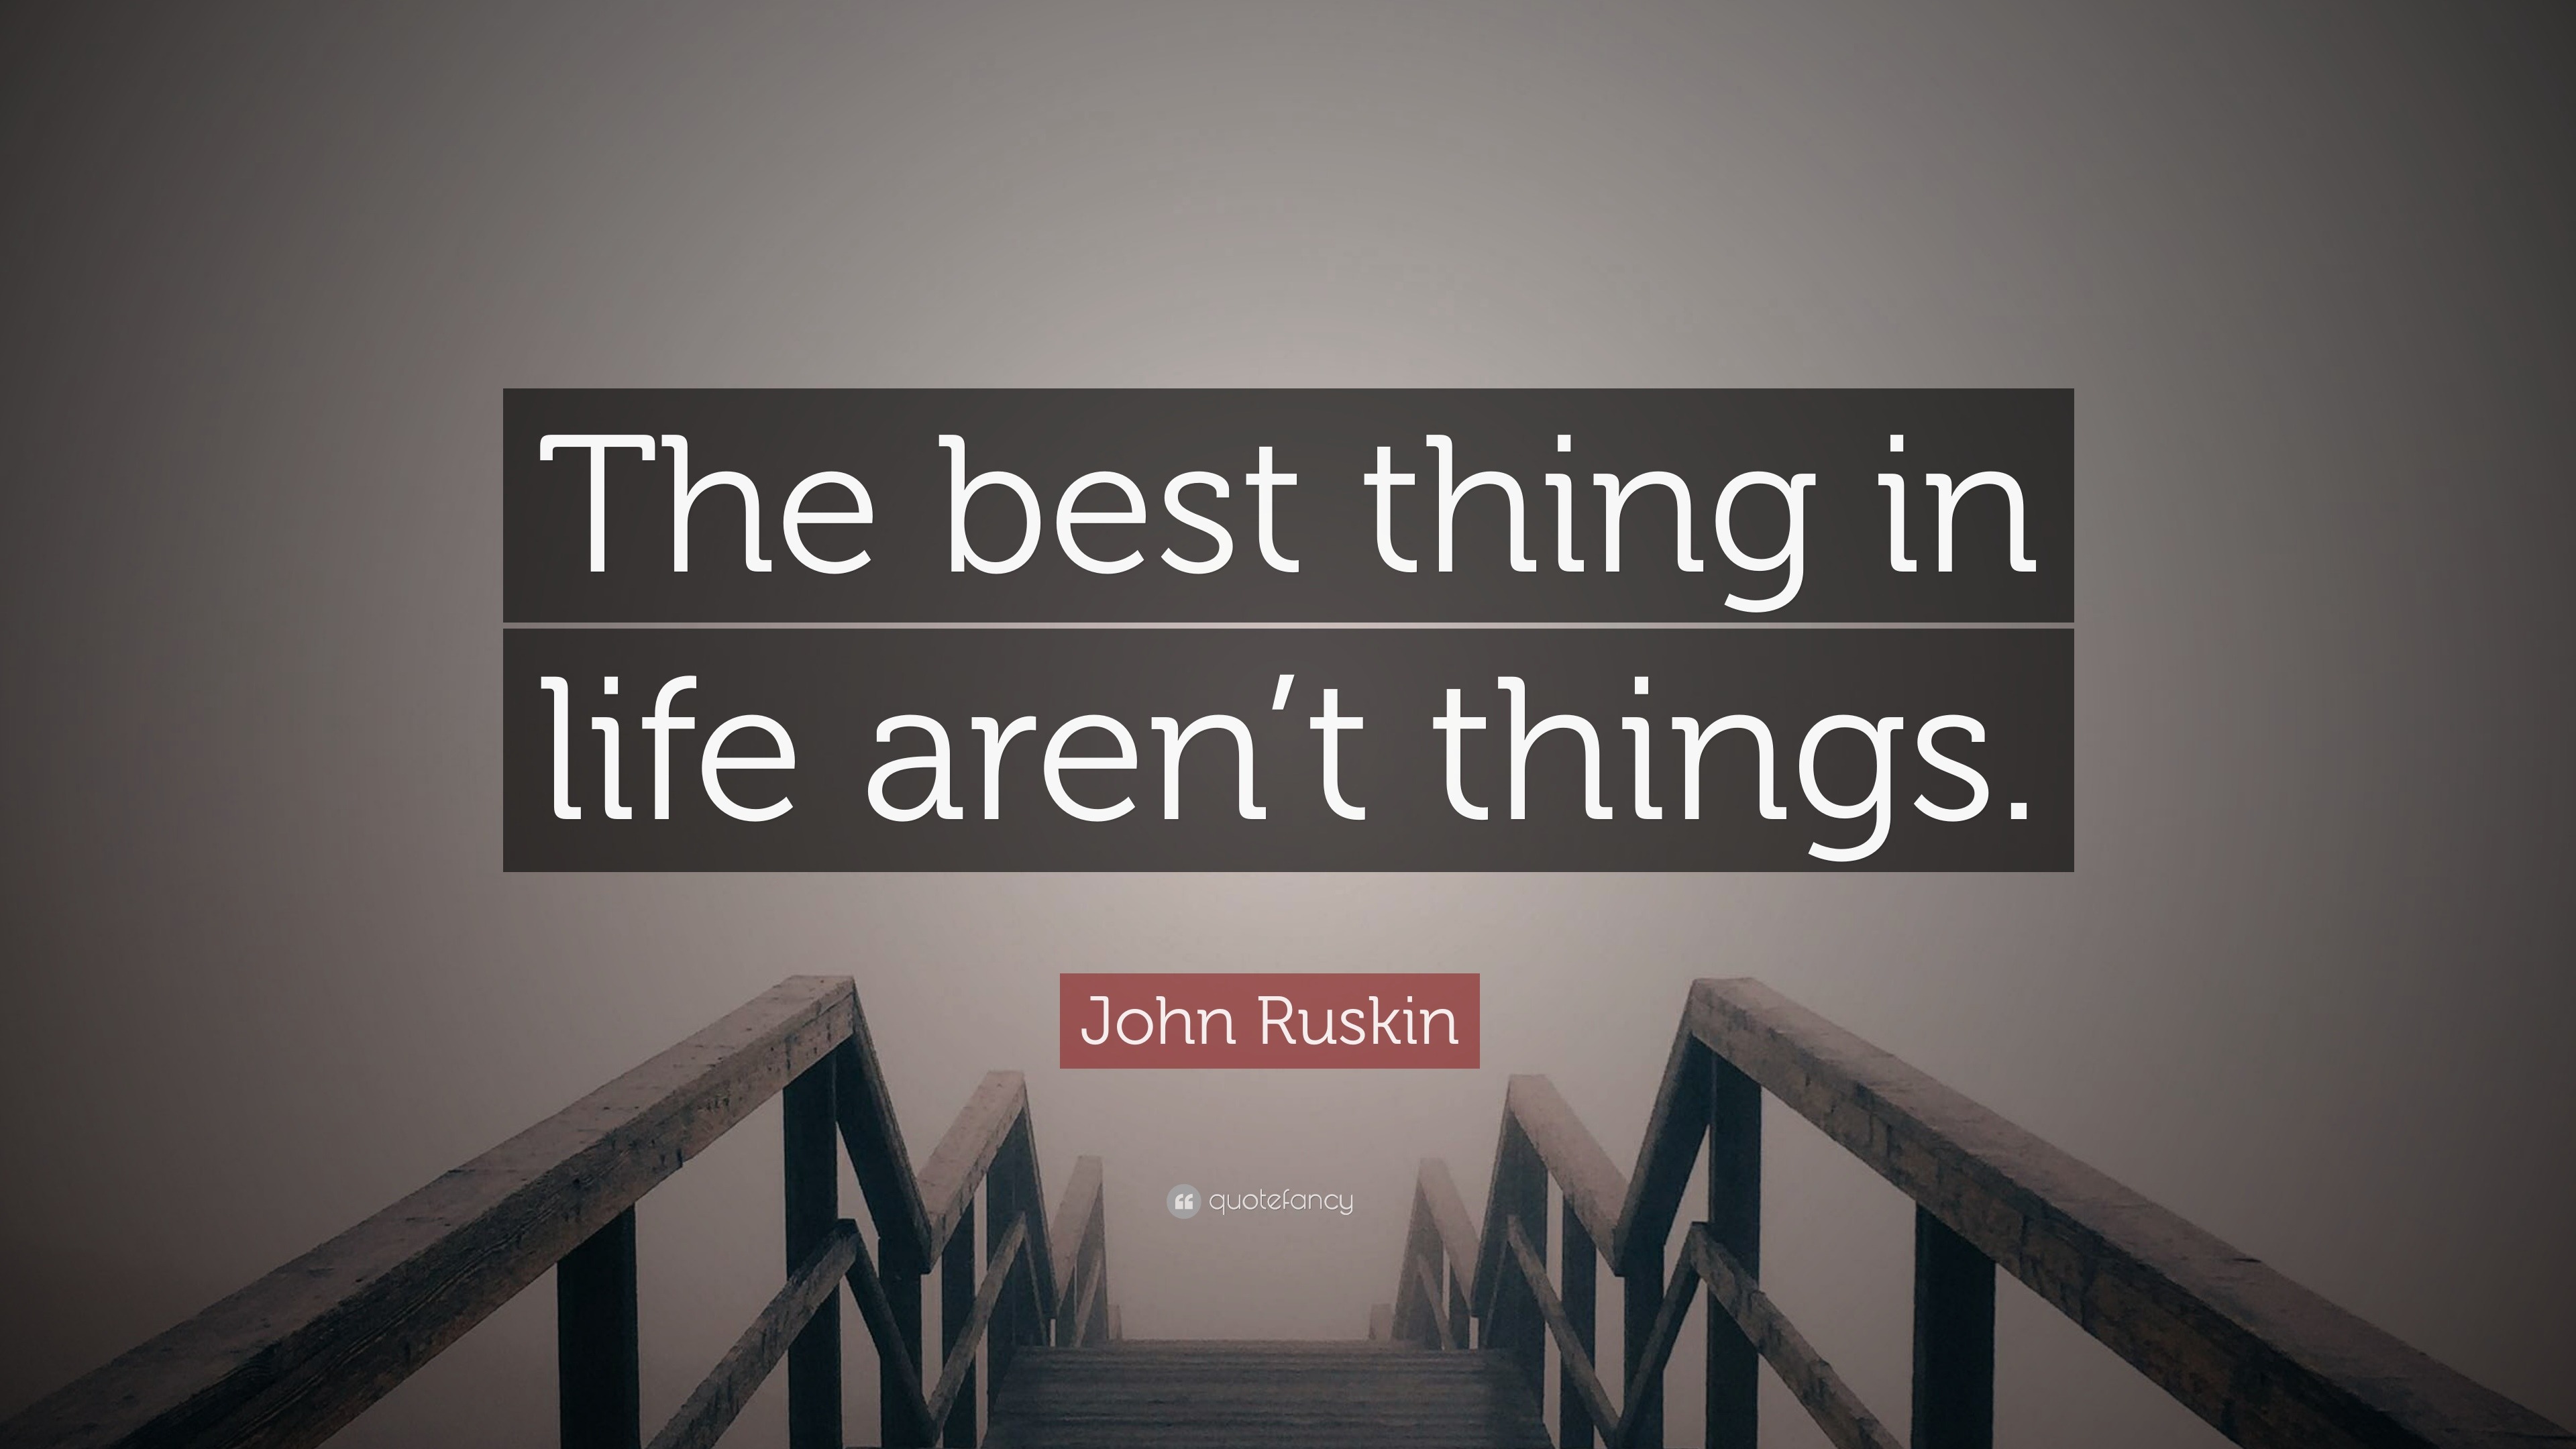 John Ruskin Quote “The best thing in life aren t things ”